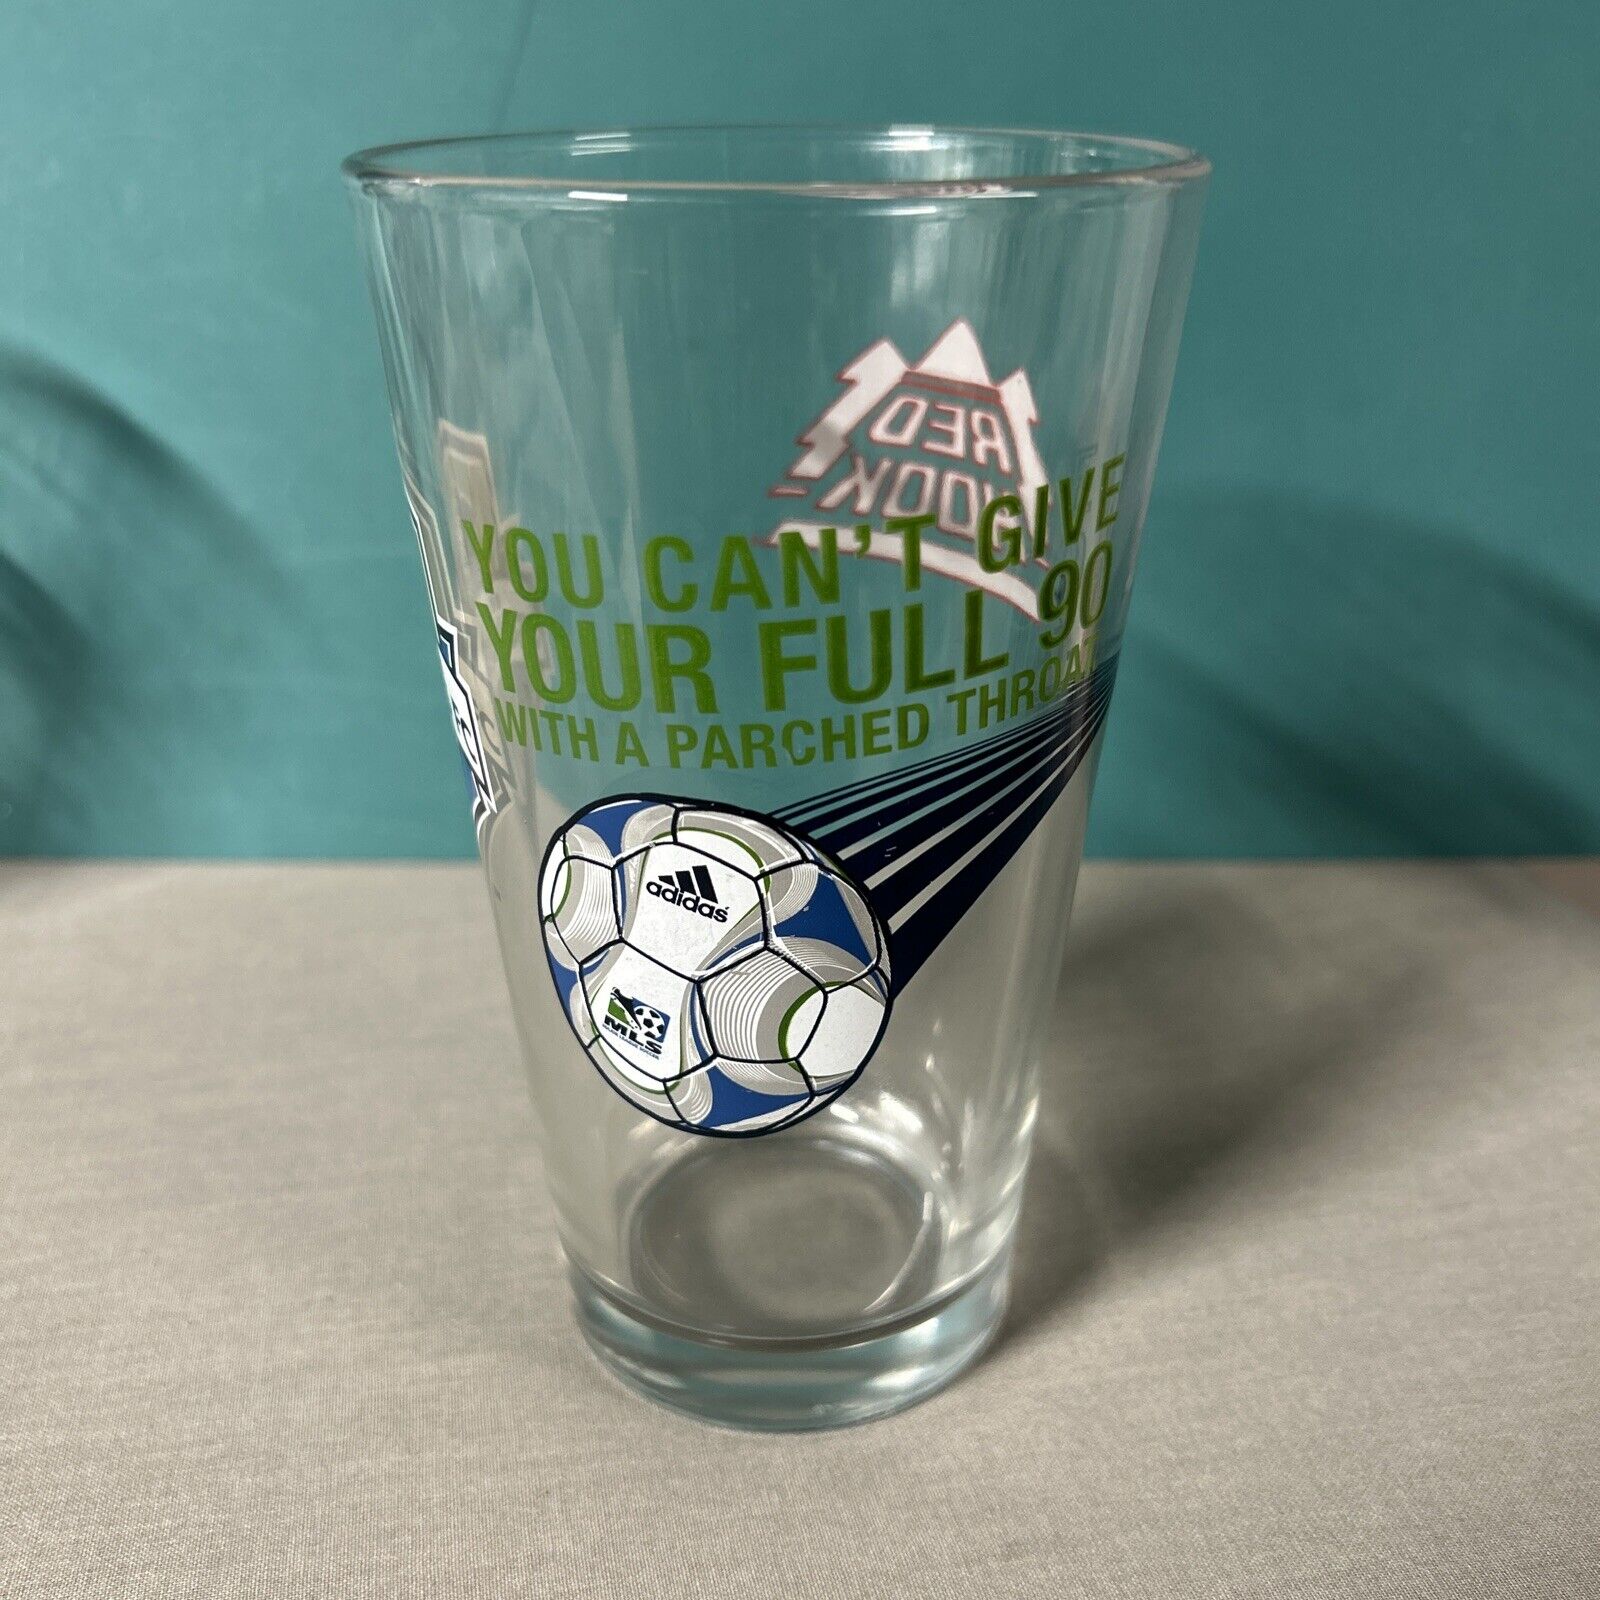 Rare Redhook Beer 16 OZ Pint Glass SEATTLE SOUNDERS Soccer Team Full 90 Parched